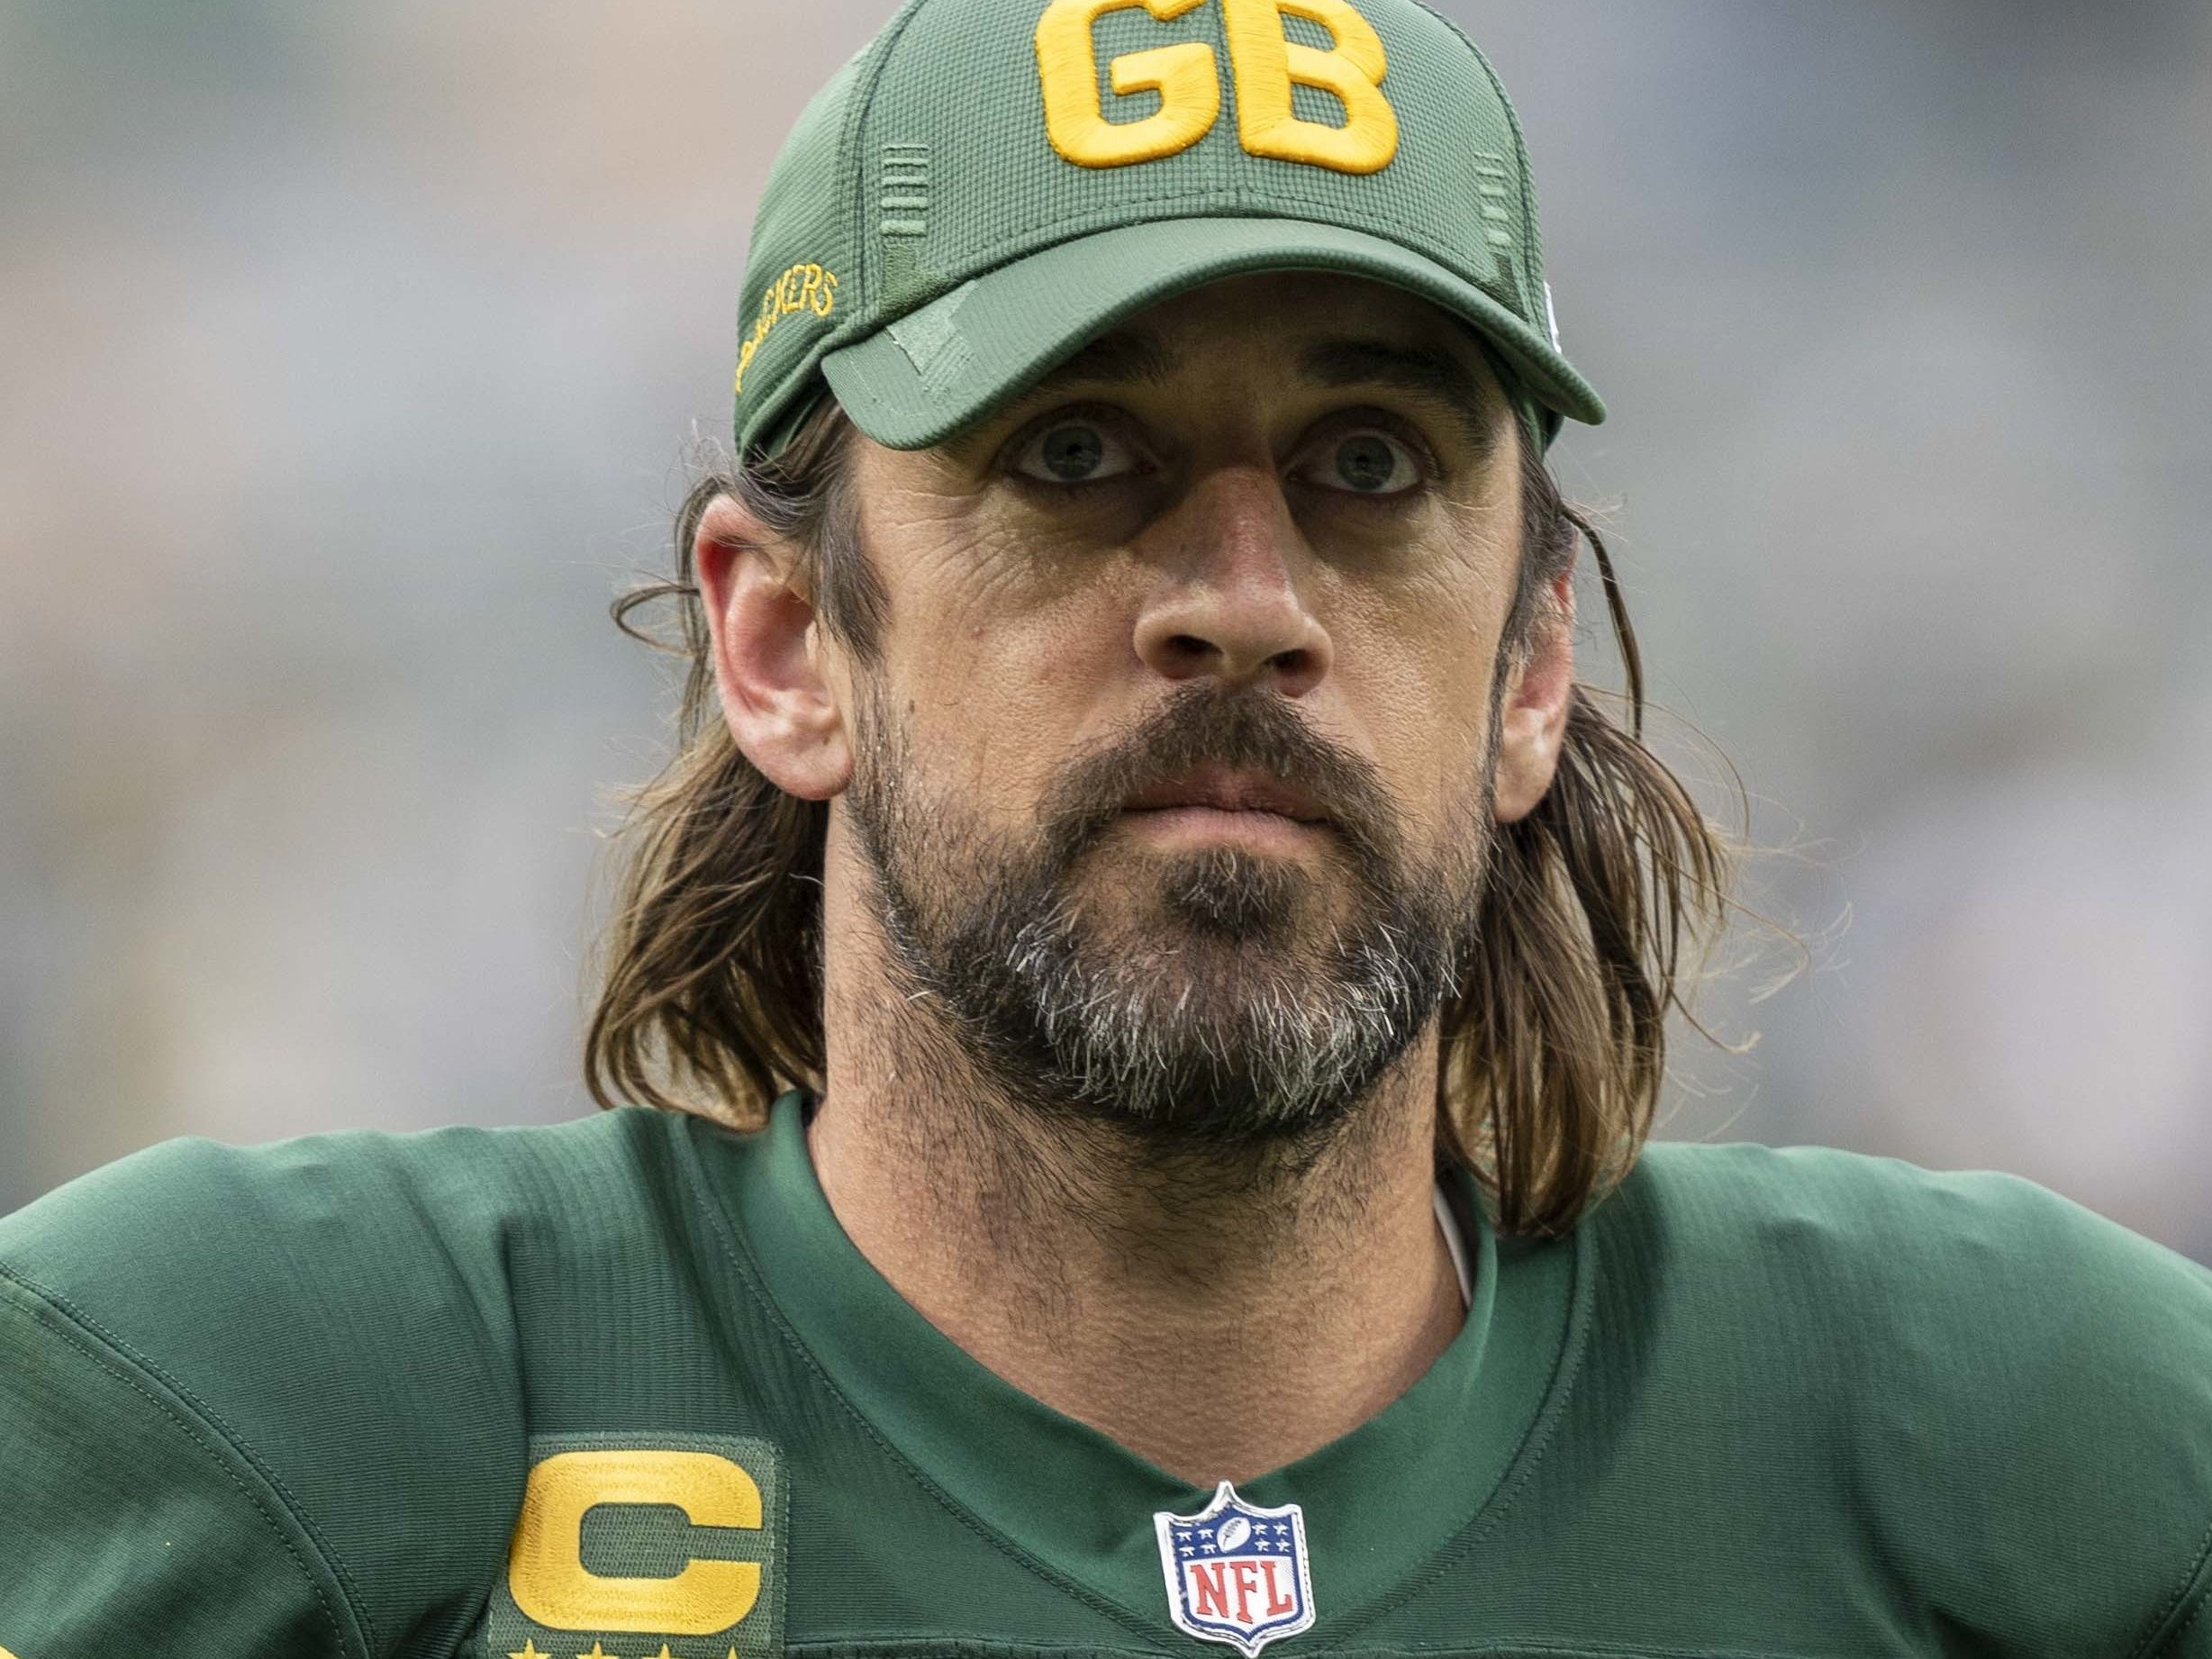 NFL reports no penalty for Aaron Rodgers taking ayahuasca